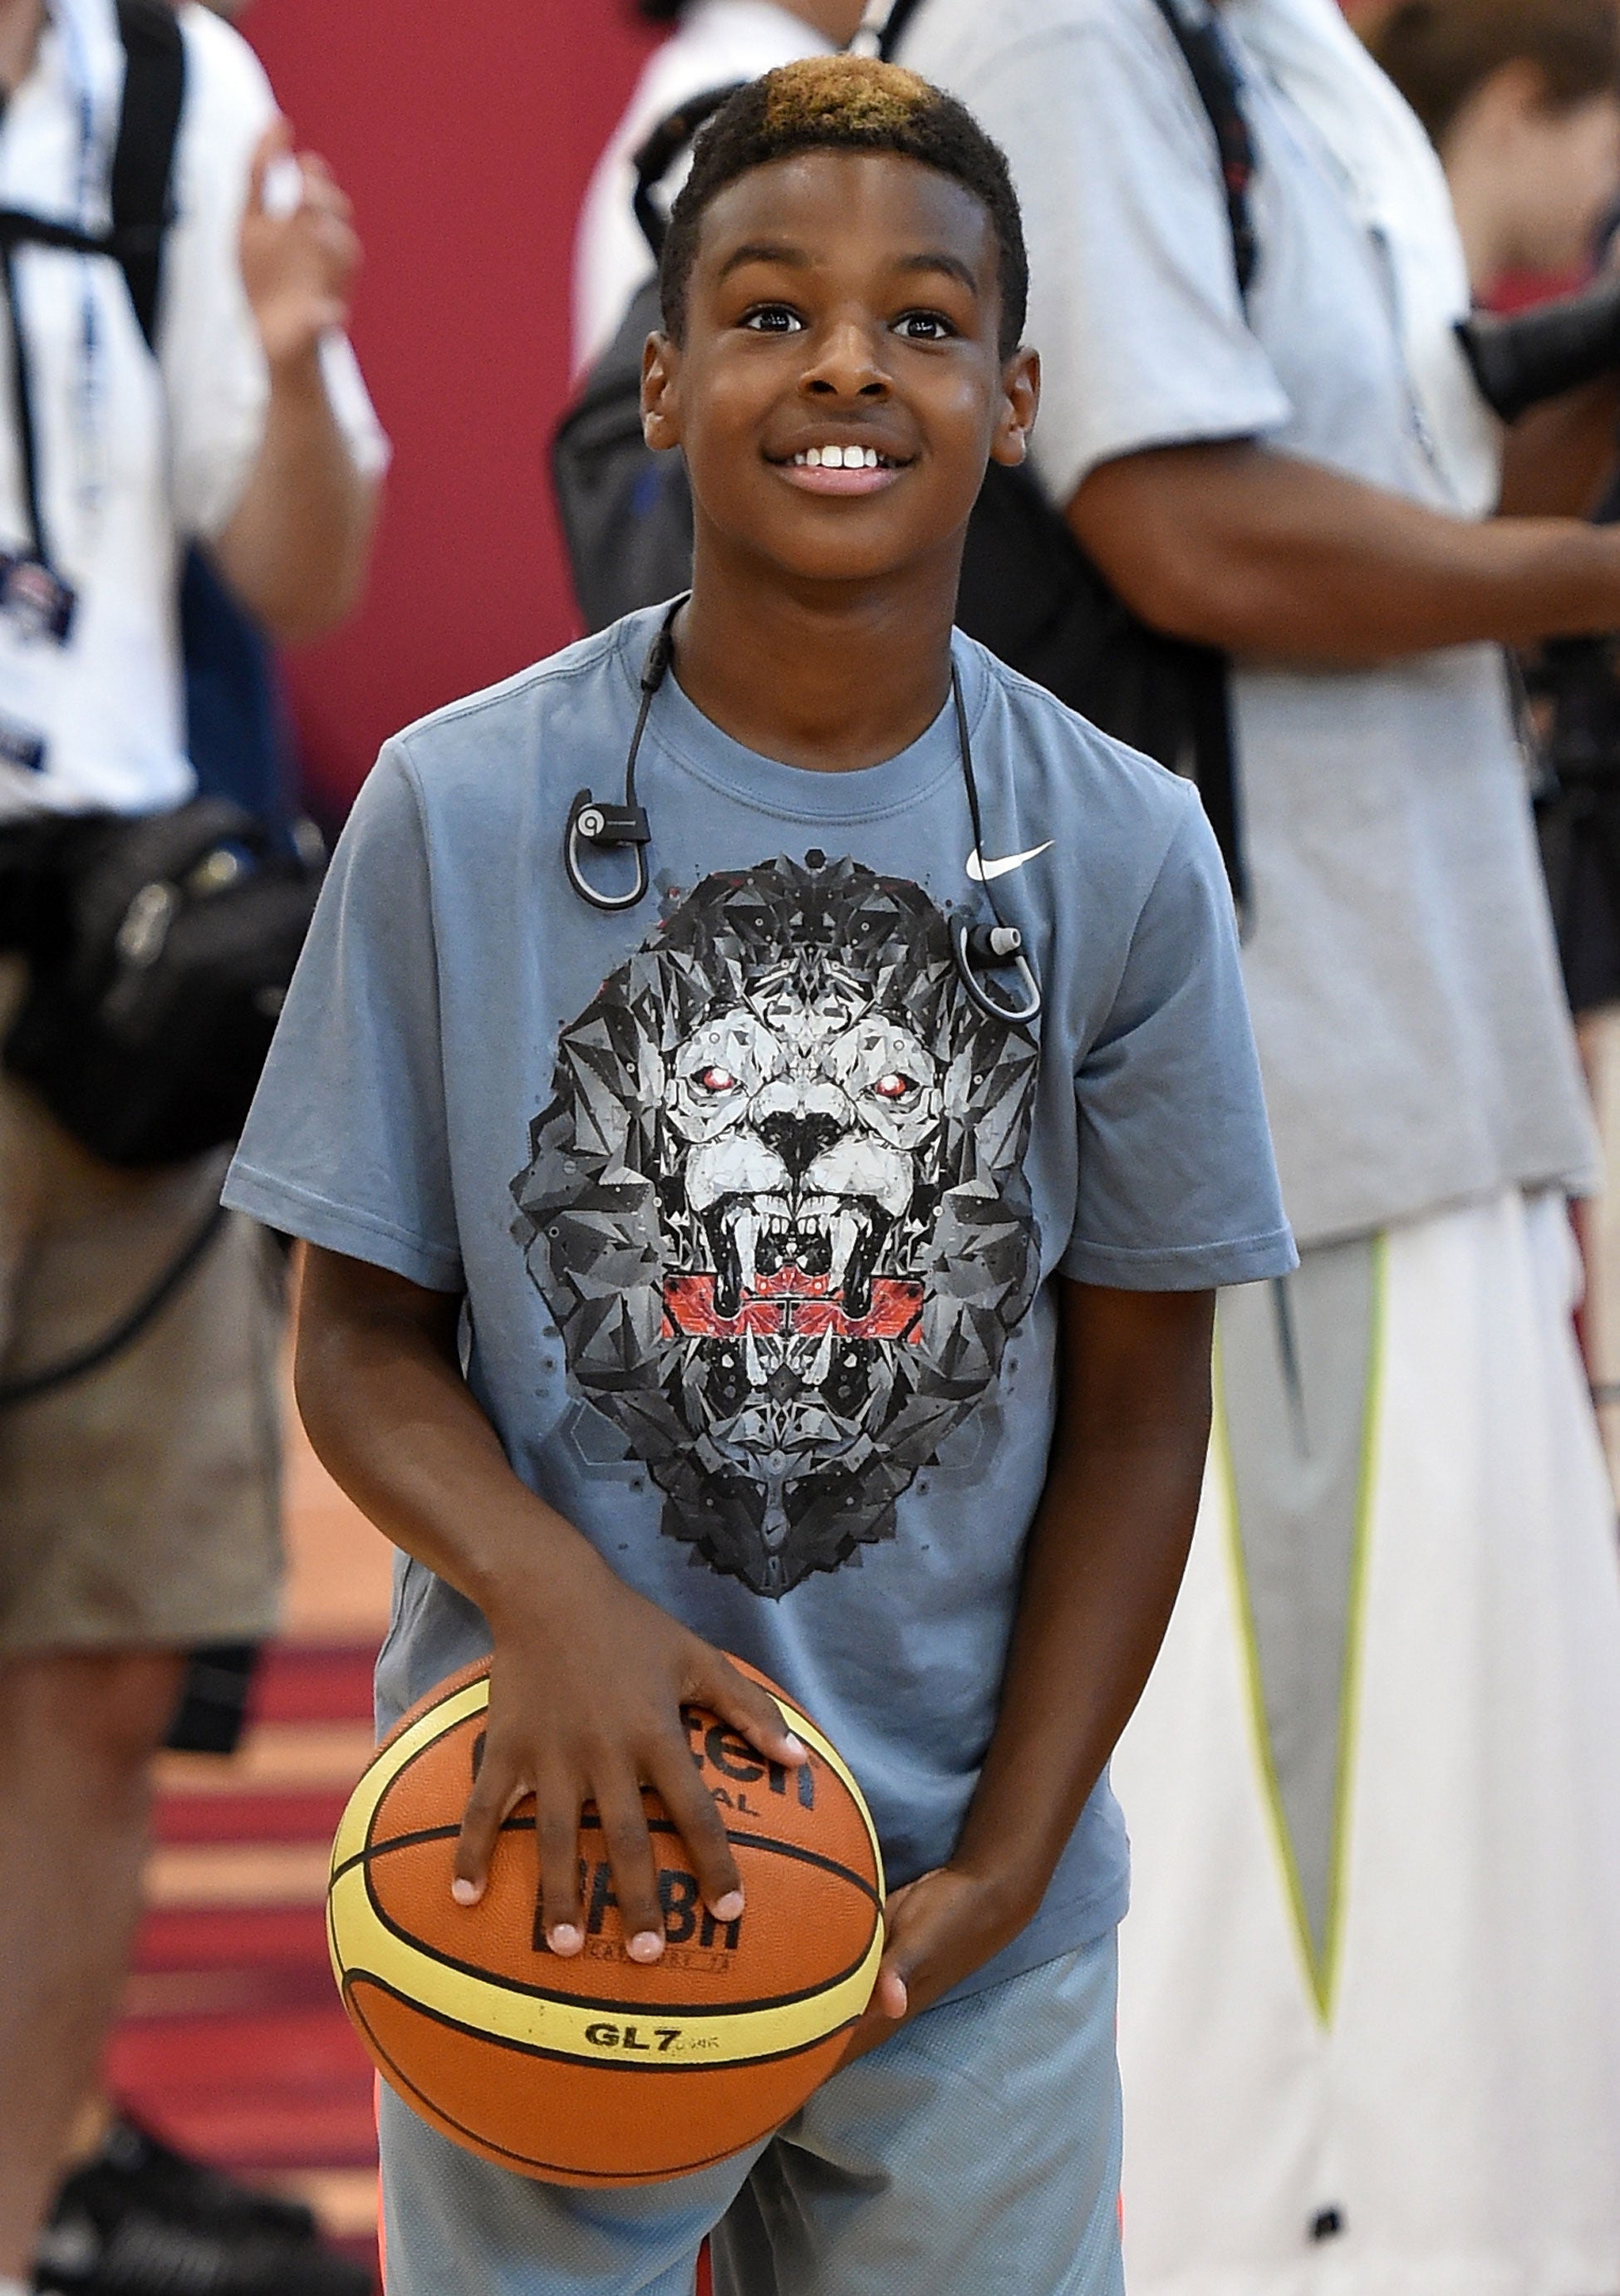 Talented Kid Alert! LeBron James Jr. Taught Himself To Play The Piano
